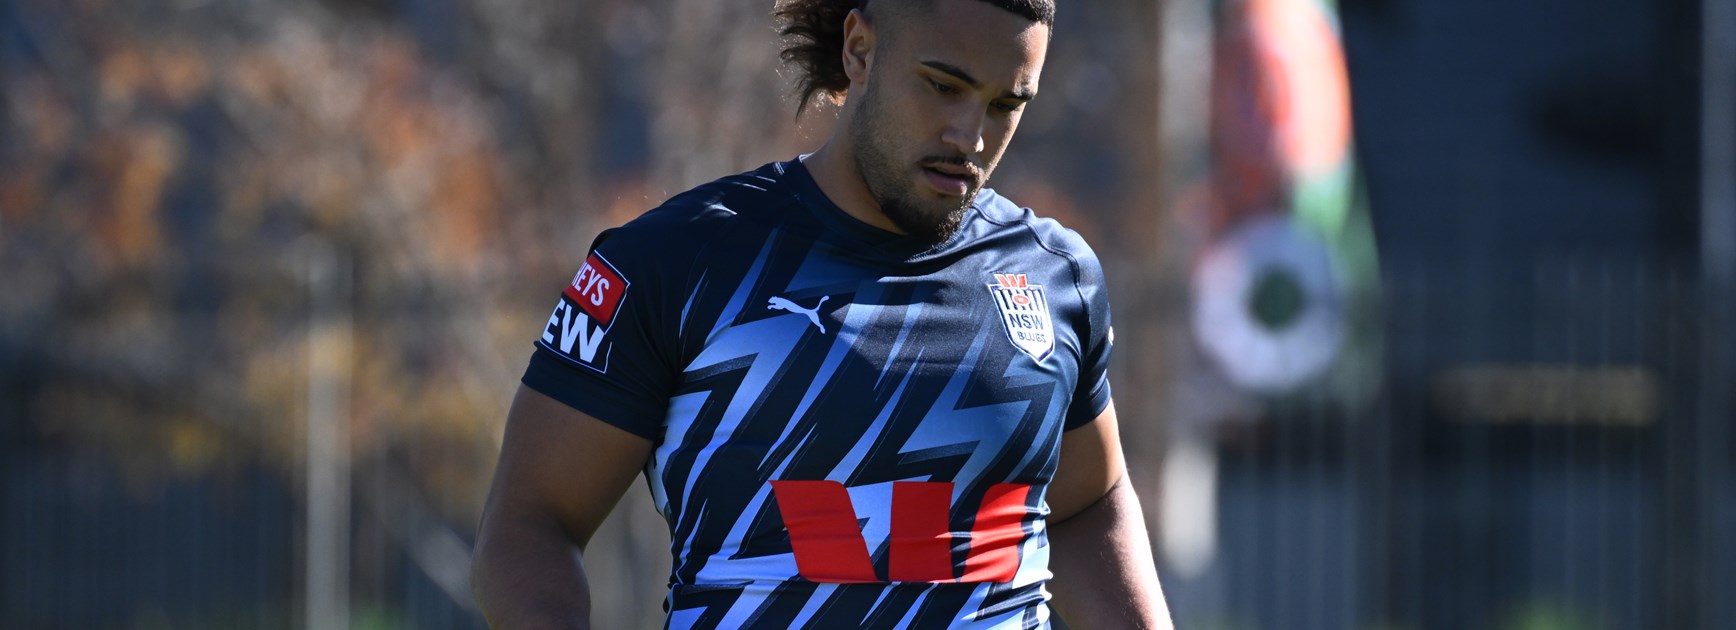 NSW Blues - In just his third start in the fullback jersey at NRL